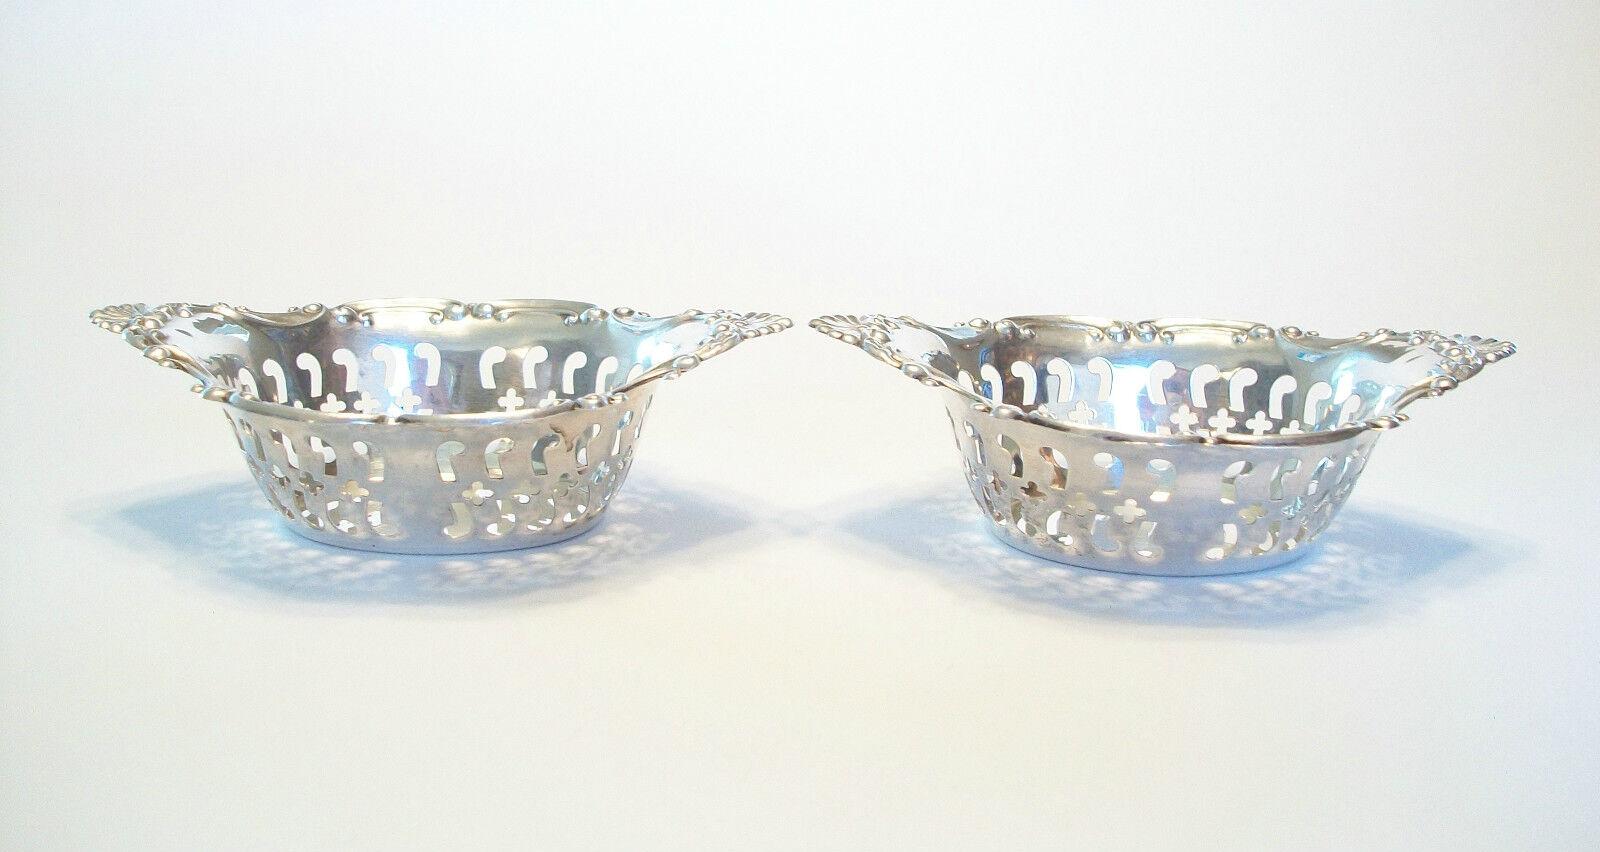 Hand-Crafted BIRKS - Pair of Pierced Sterling Silver Candy Dishes - Canada - Mid 20th Century For Sale